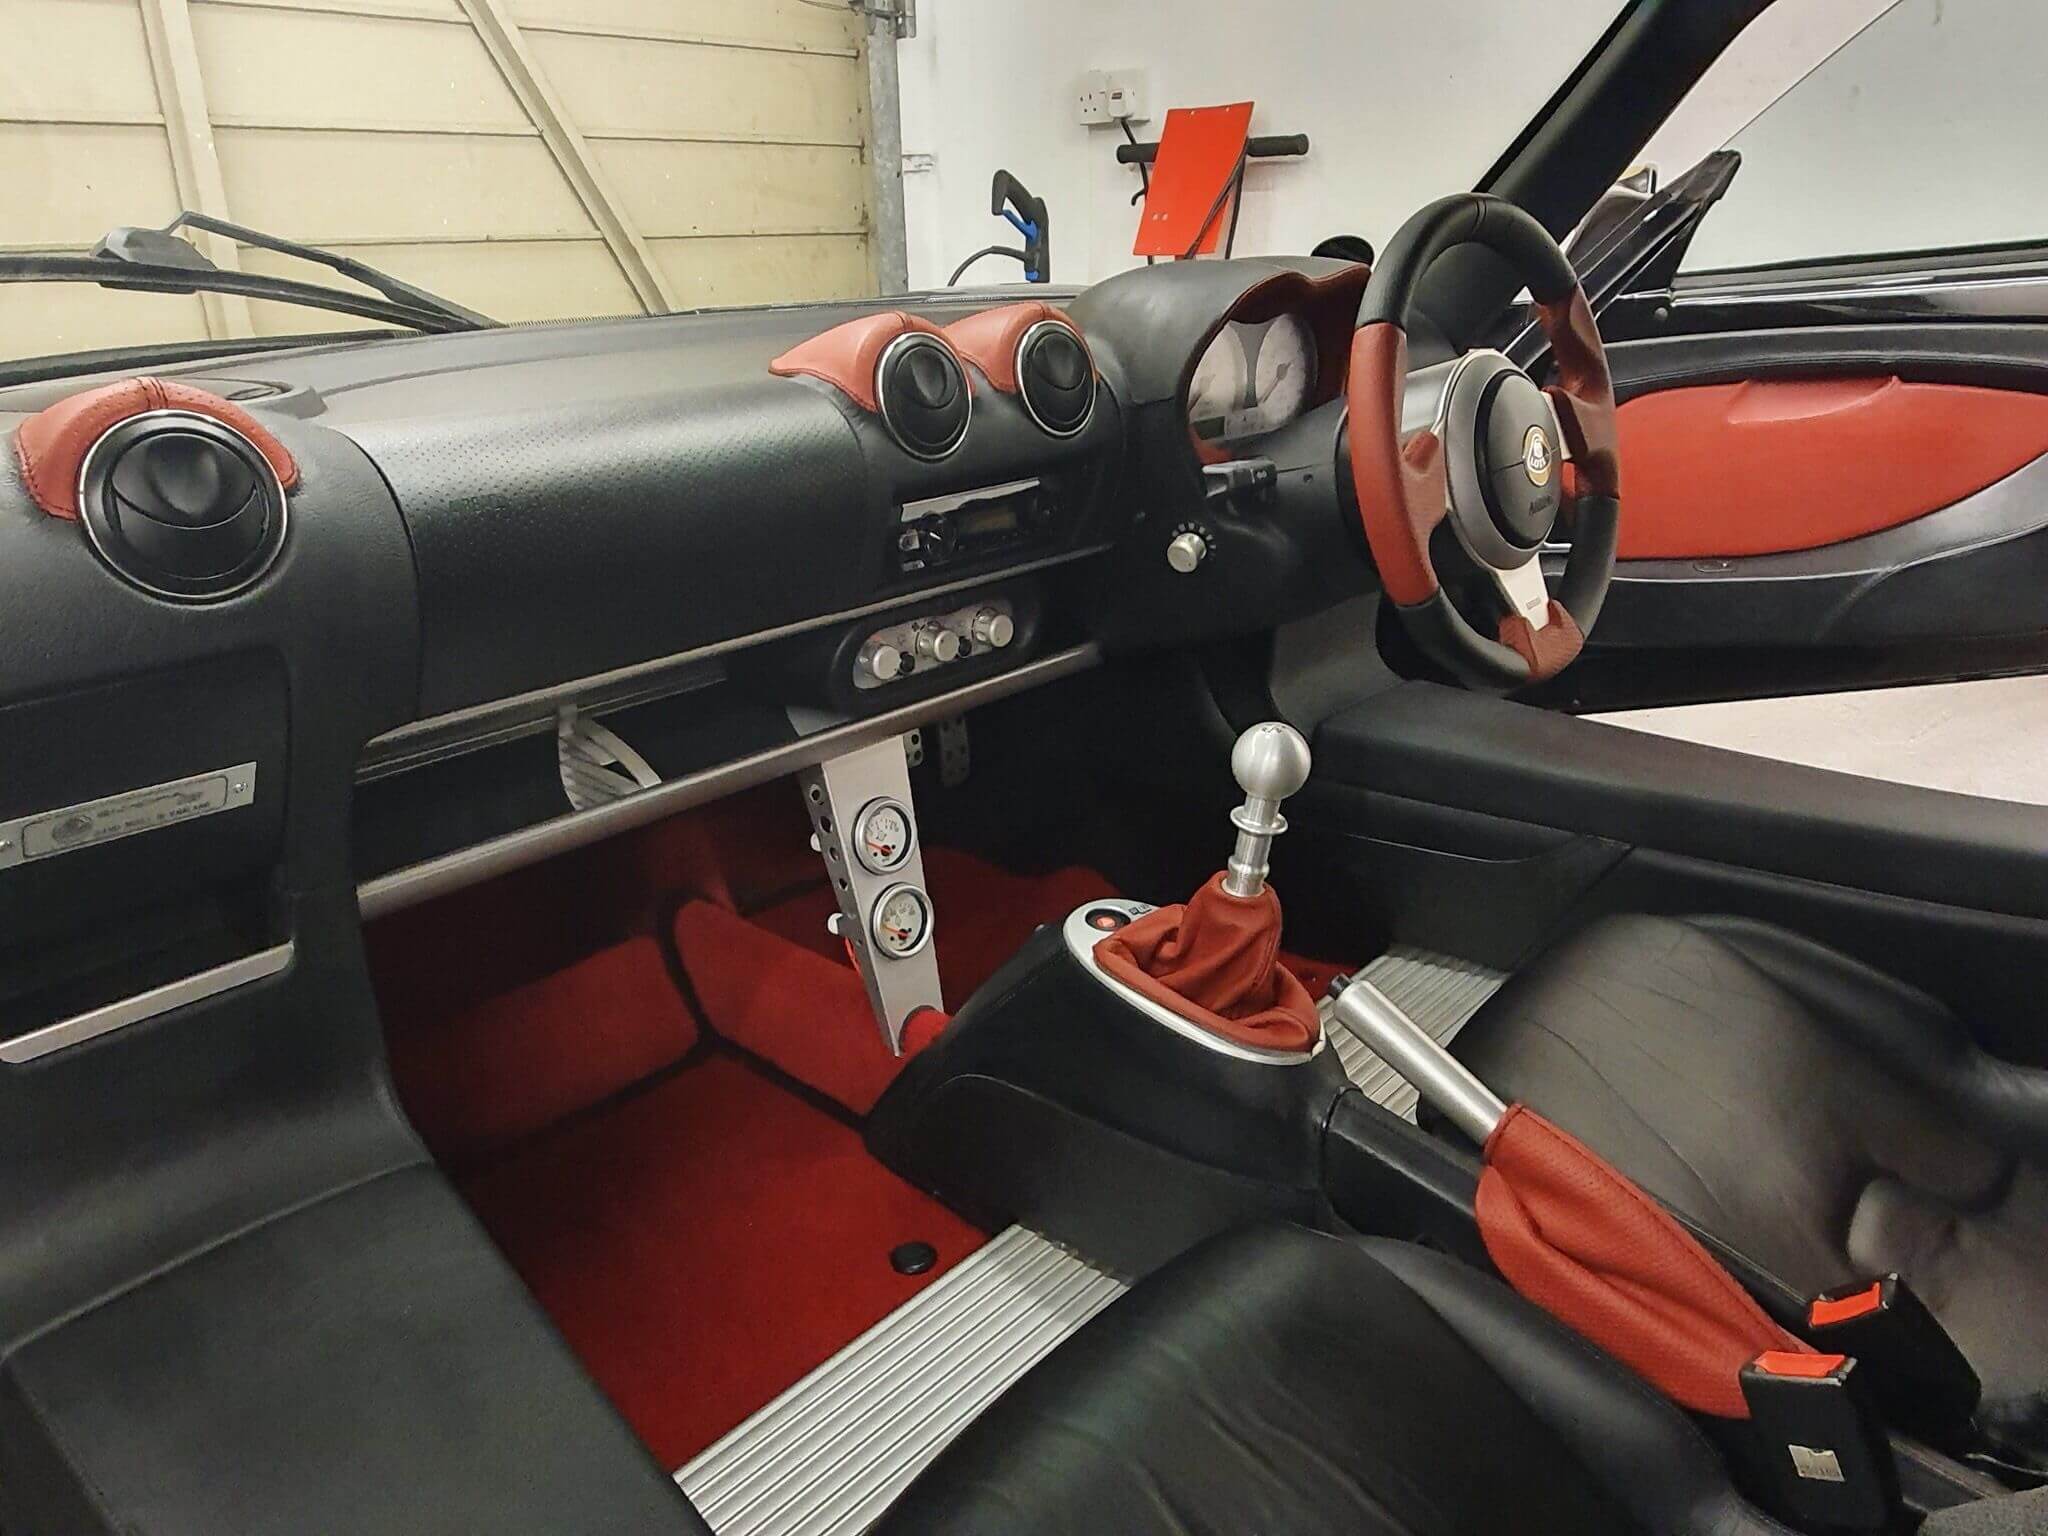 Full red and black interior